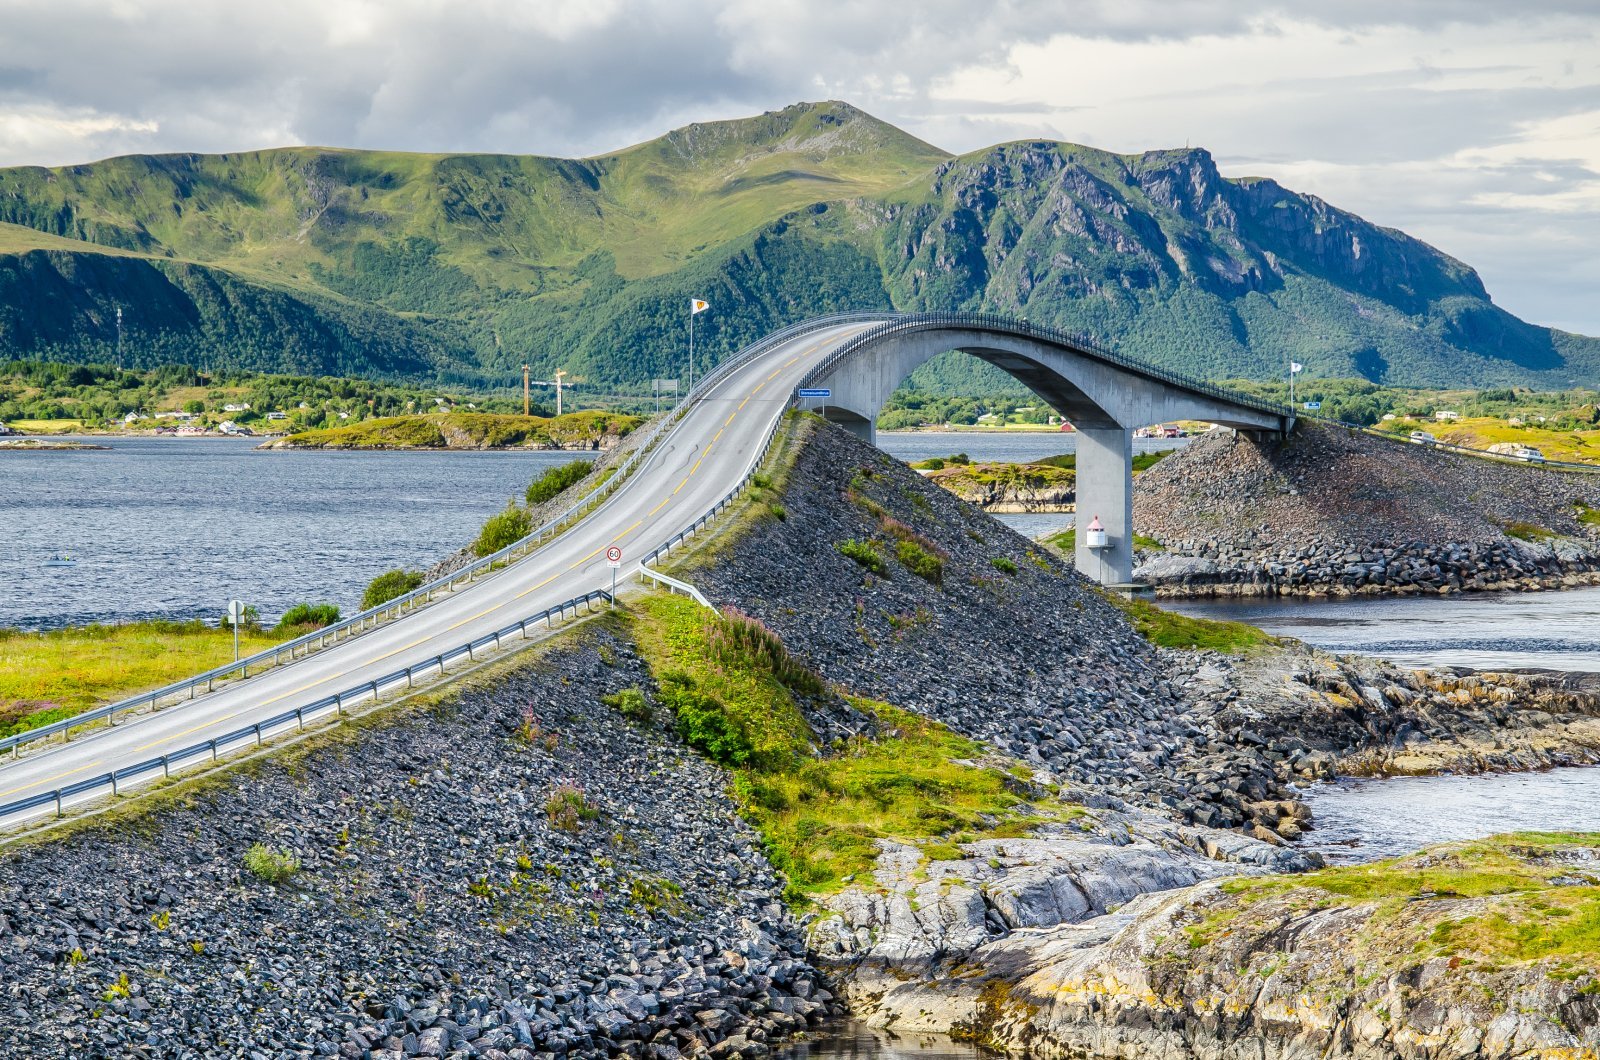 <p class="wp-caption-text">Image Credit: Shutterstock / Czech the World</p>  <p><span>Norway’s Atlantic Road is a marvel of modern engineering, offering a journey that is as thrilling as it is picturesque. Stretching over 8 kilometers, this unique roadway connects a series of islands via a combination of causeways, viaducts, and eight bridges, with the Storseisundet Bridge being the most iconic and photographed. The road’s design seamlessly blends with the dramatic natural landscape, offering drivers and passengers alike stunning views of the Norwegian Sea, with frequent sightings of seals and whales.</span></p>